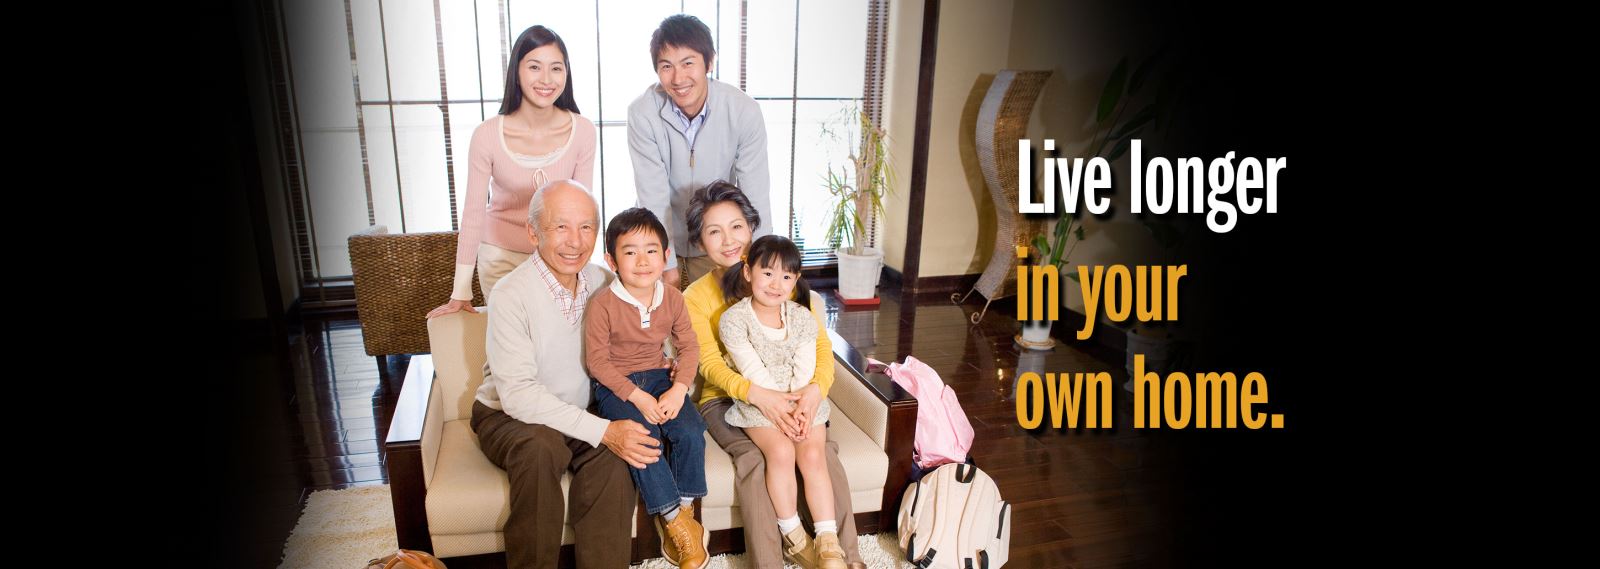 Live Longer in your own home